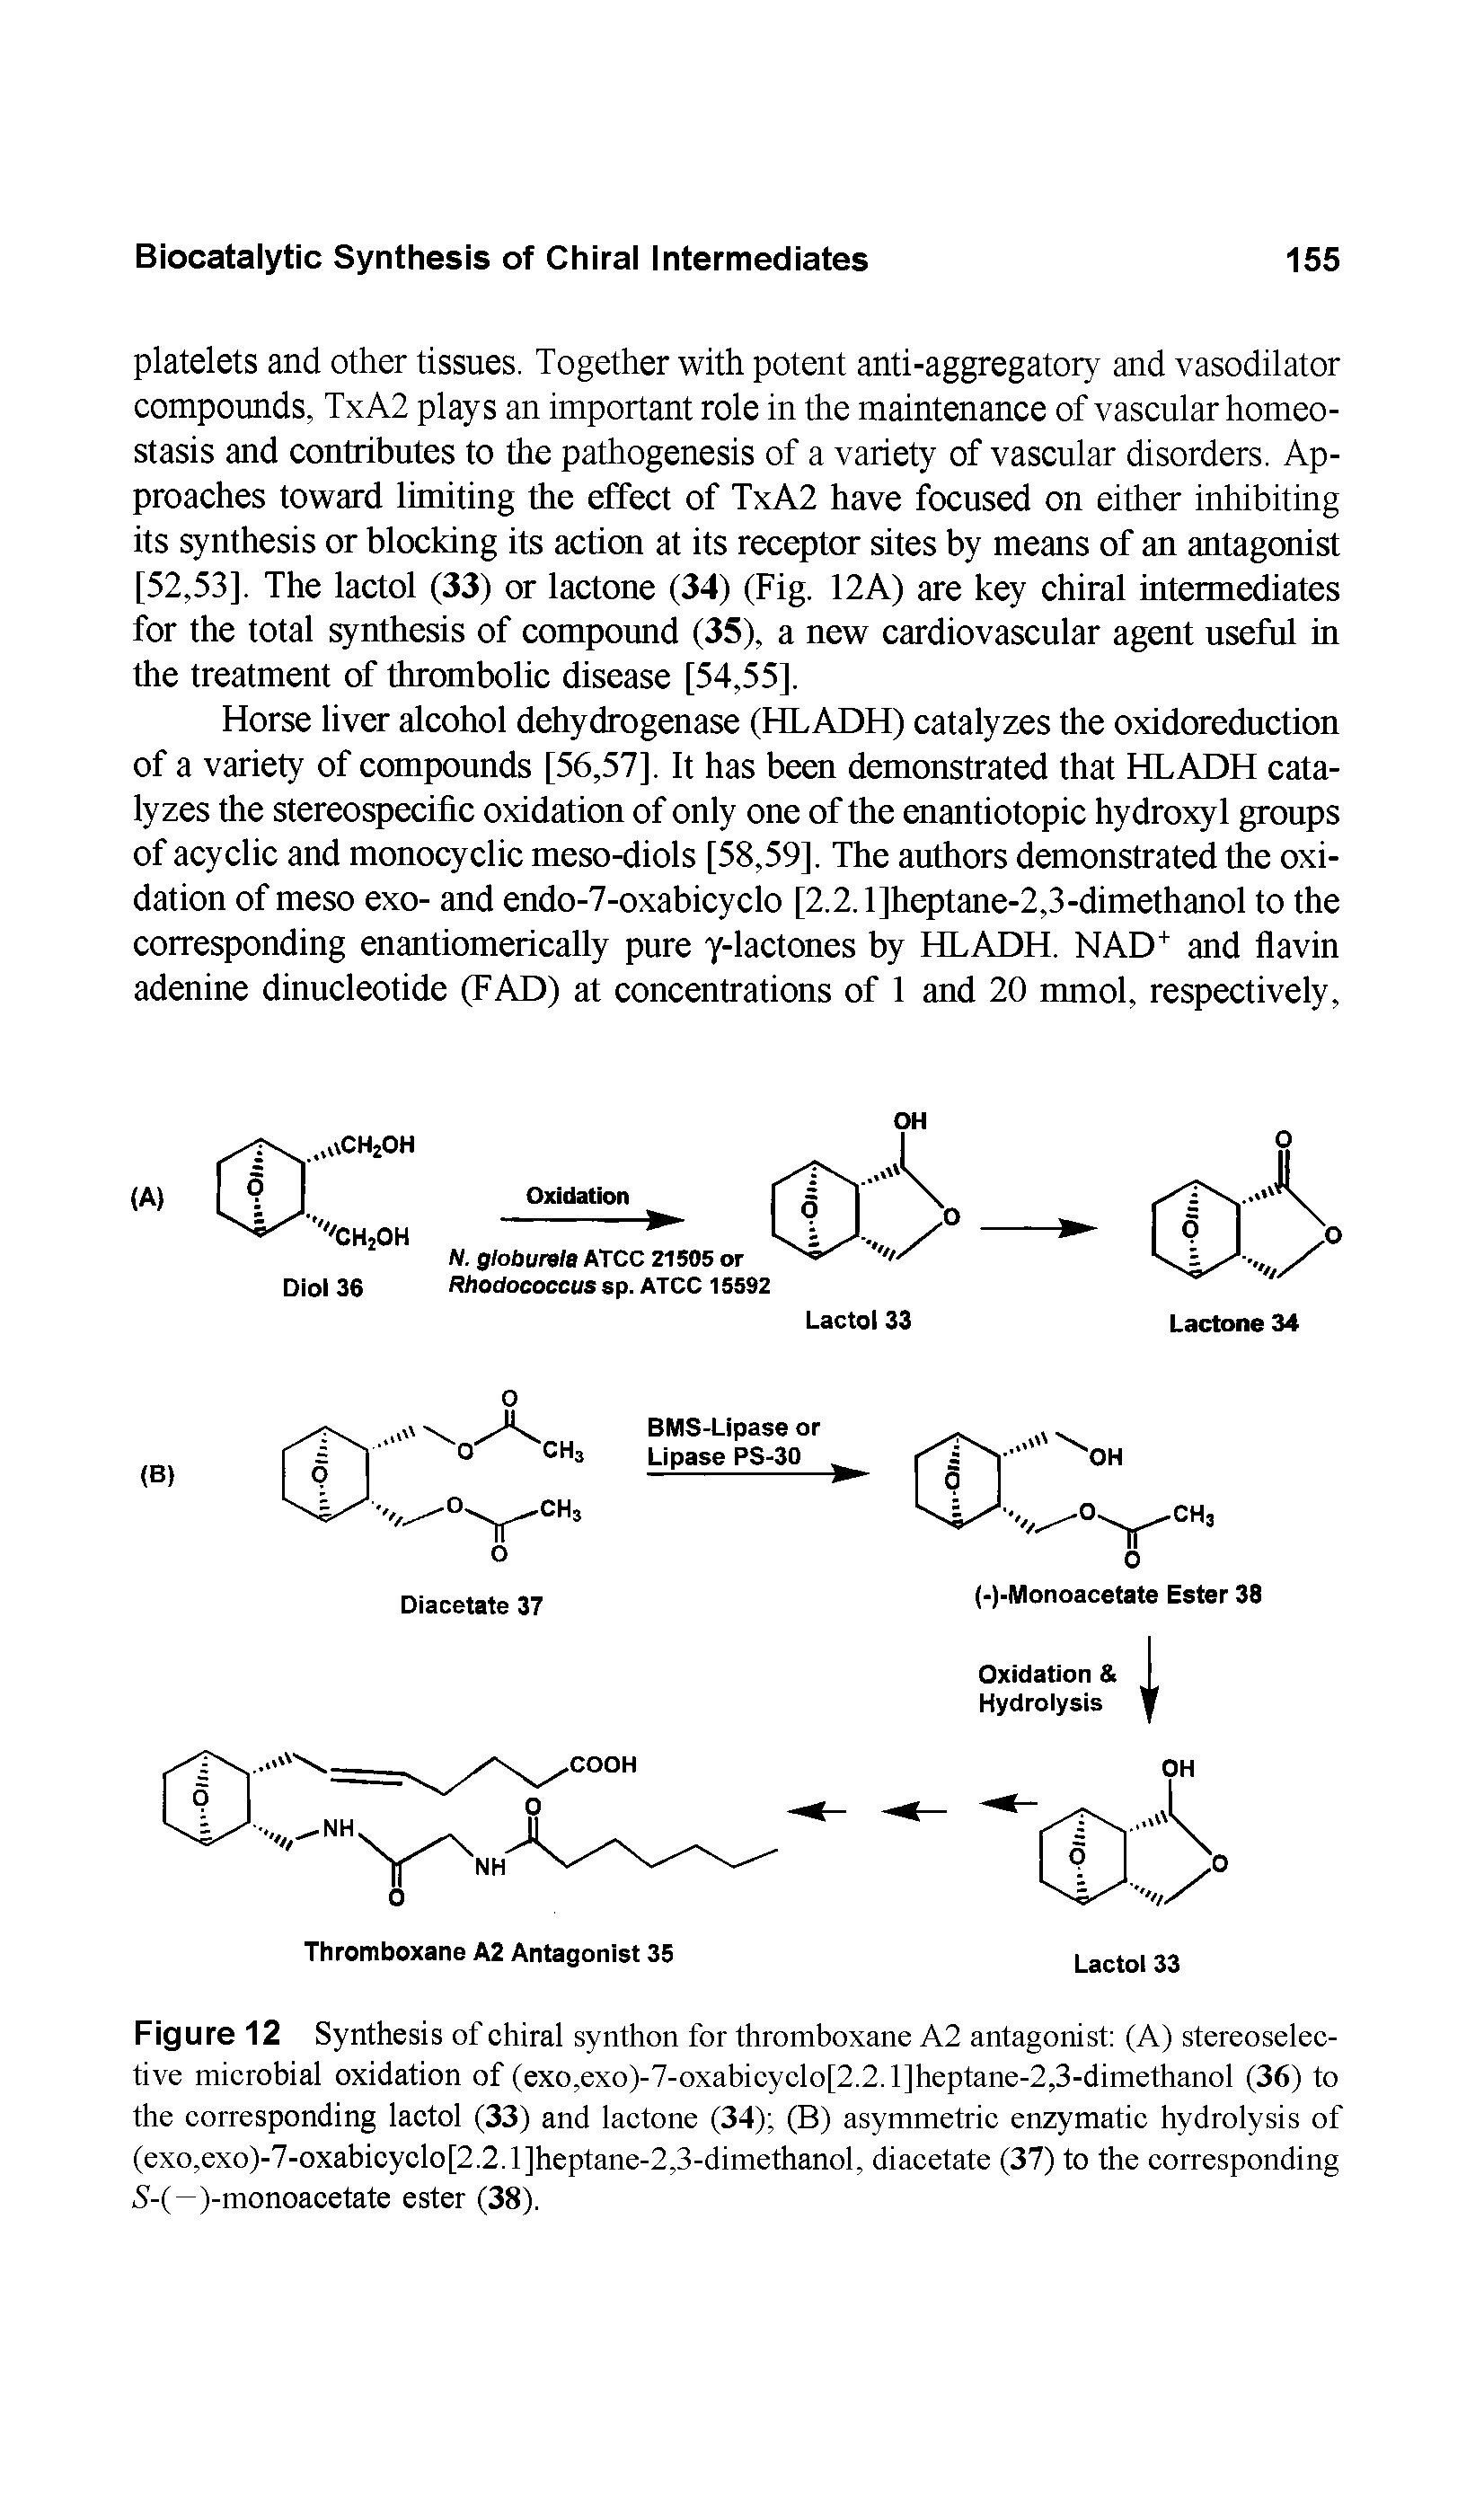 Figure 12 Synthesis of chiral synthon for thromboxane A2 antagonist (A) stereoselective microbial oxidation of (exo,exo)-7-oxabicyclo[2.2. l]heptane-2,3-dimethanol (36) to the corresponding lactol (33) and lactone (34) (B) asymmetric enzymatic hydrolysis of (exo,exo)-7-oxabicyclo[2.2.1]heptane-2,3-dimethanol, diacetate (37) to the corresponding S-(—)-monoacetate ester (38).